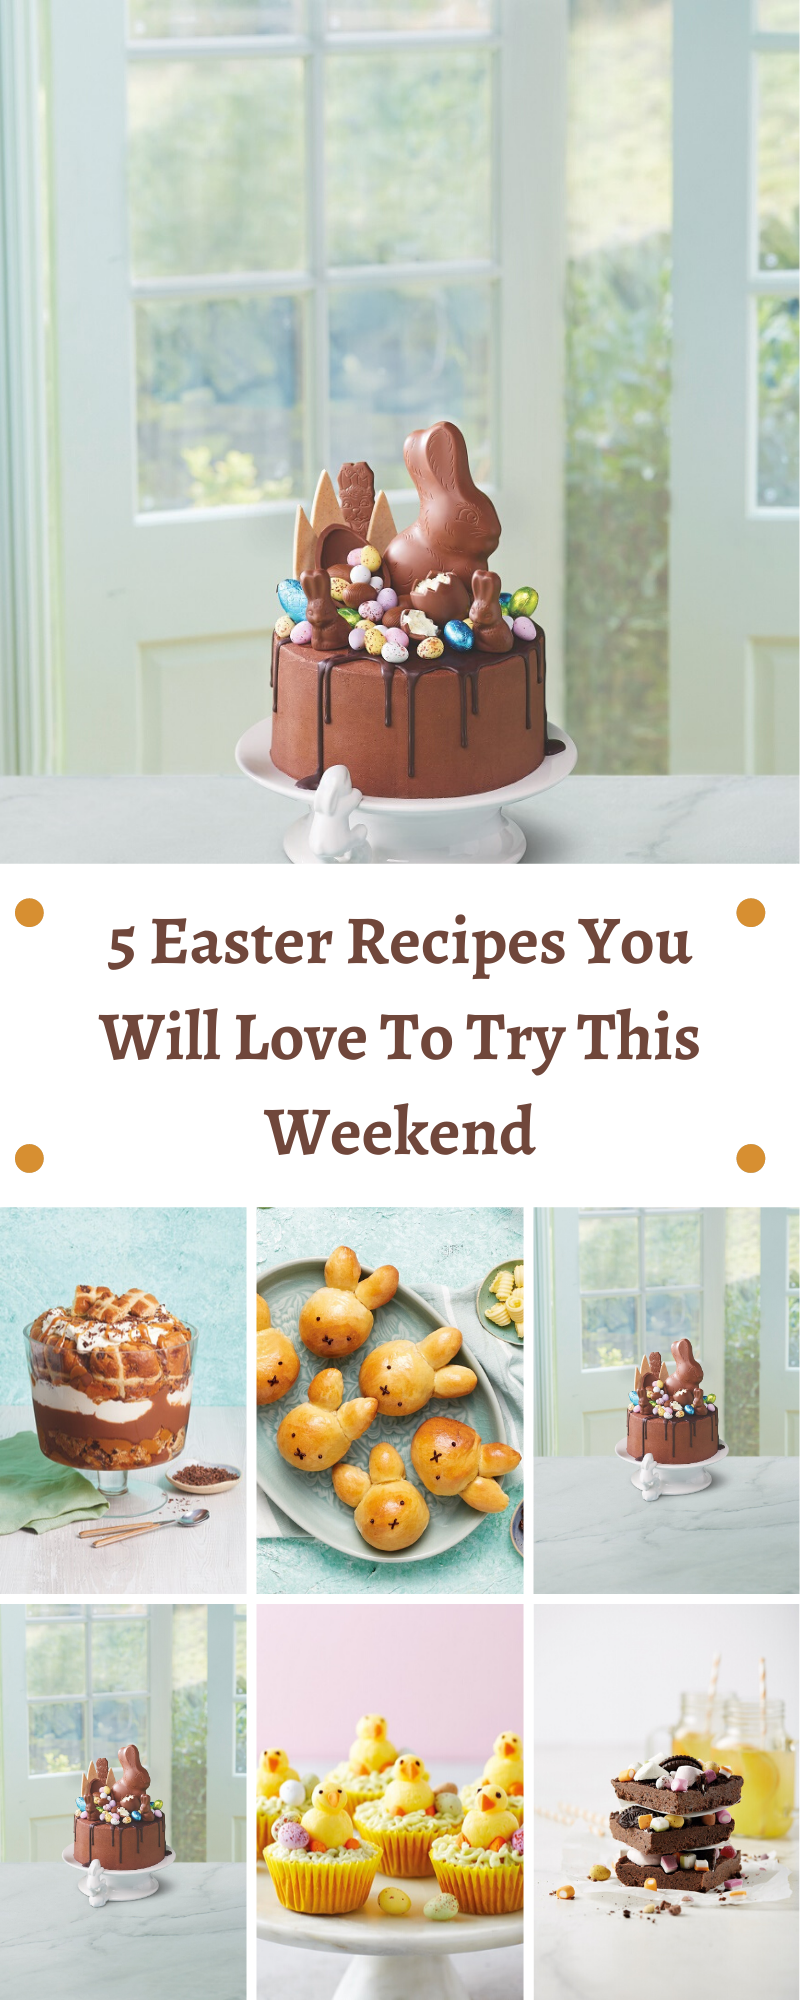 5 Easter Recipes You Will Love To Try This Weekend